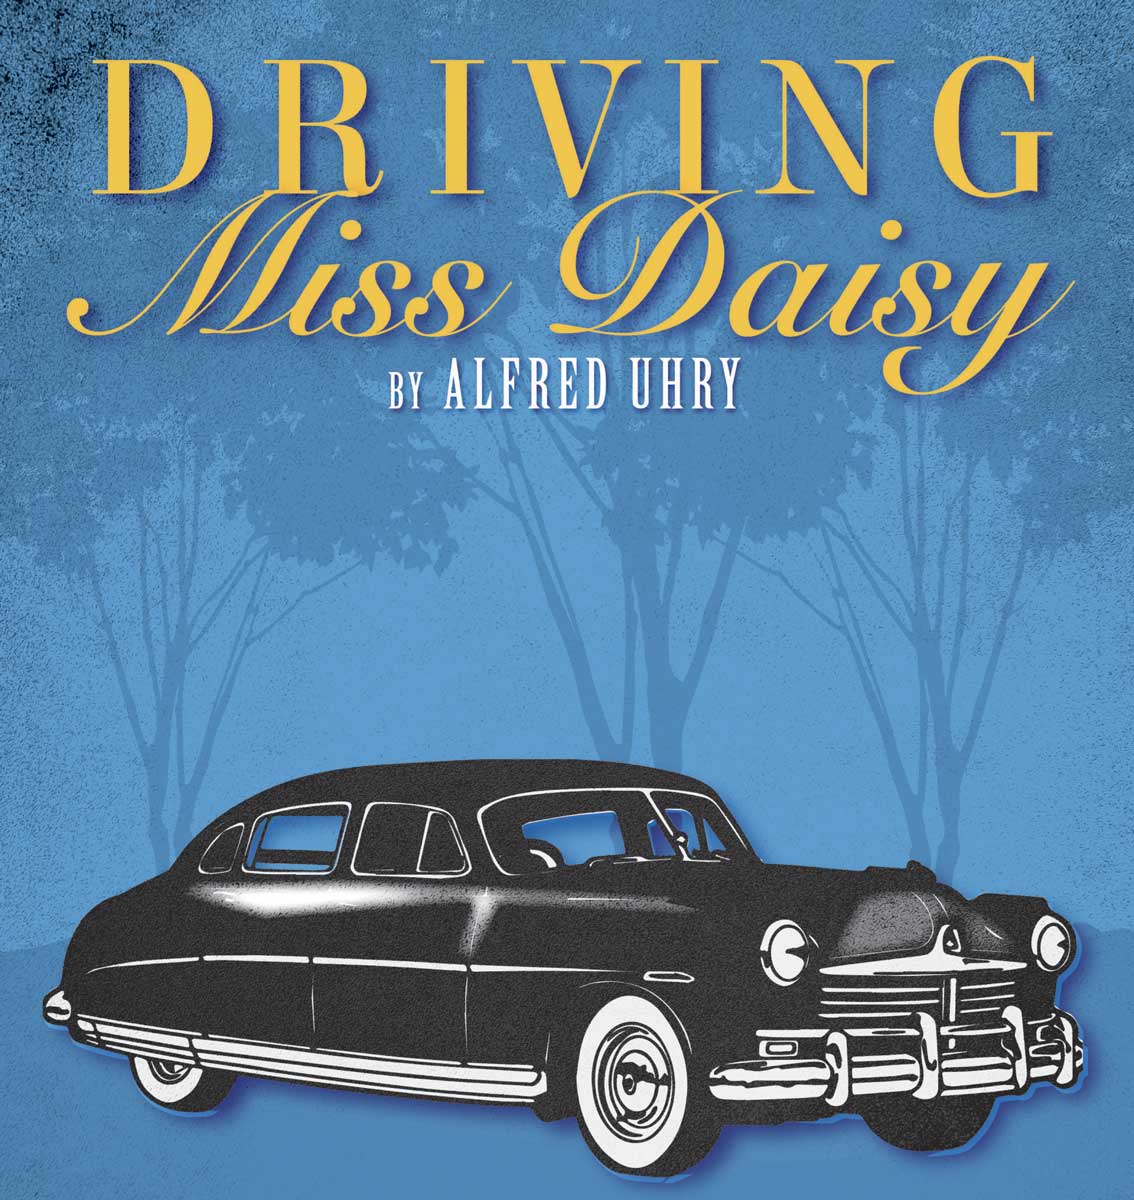 Read more about the article Tribby Arts Center presents “Driving Miss Daisy”